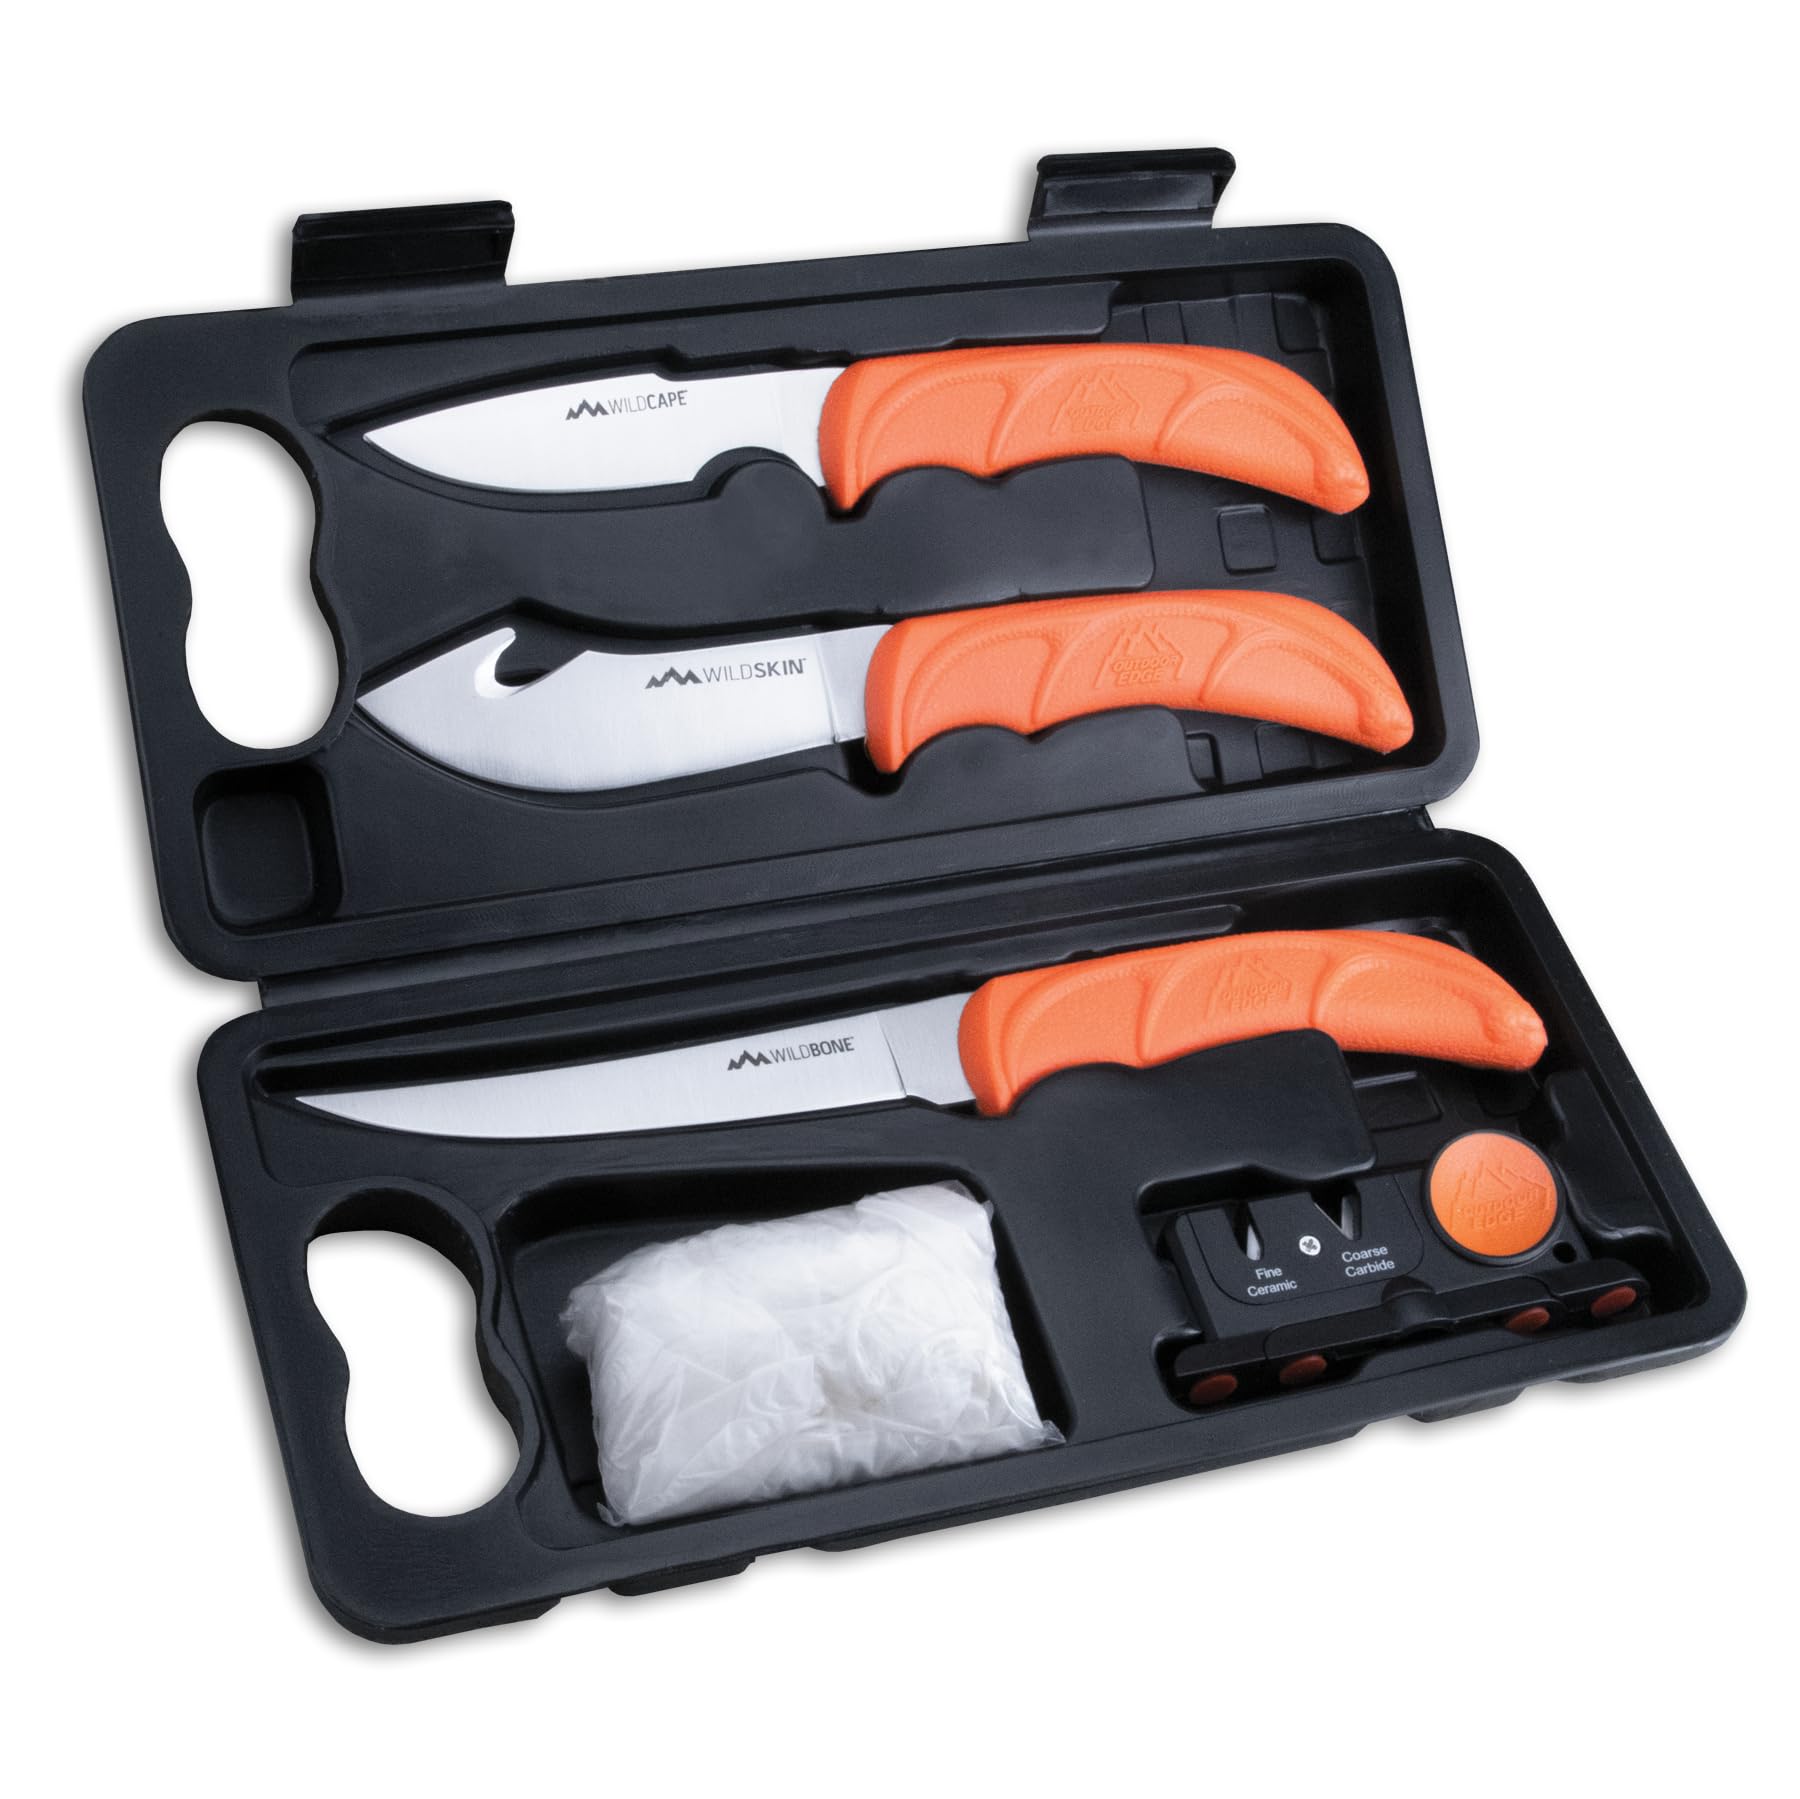 OUTDOOR EDGE WildLite 6-Piece Hunting Knife Set. Includes Skinning Knife, Boning & Caping Knives, & Sharpener all in a Compact Hard Side Case. Perfect Field Dressing Kit for Deer, Elk, Poultry & More